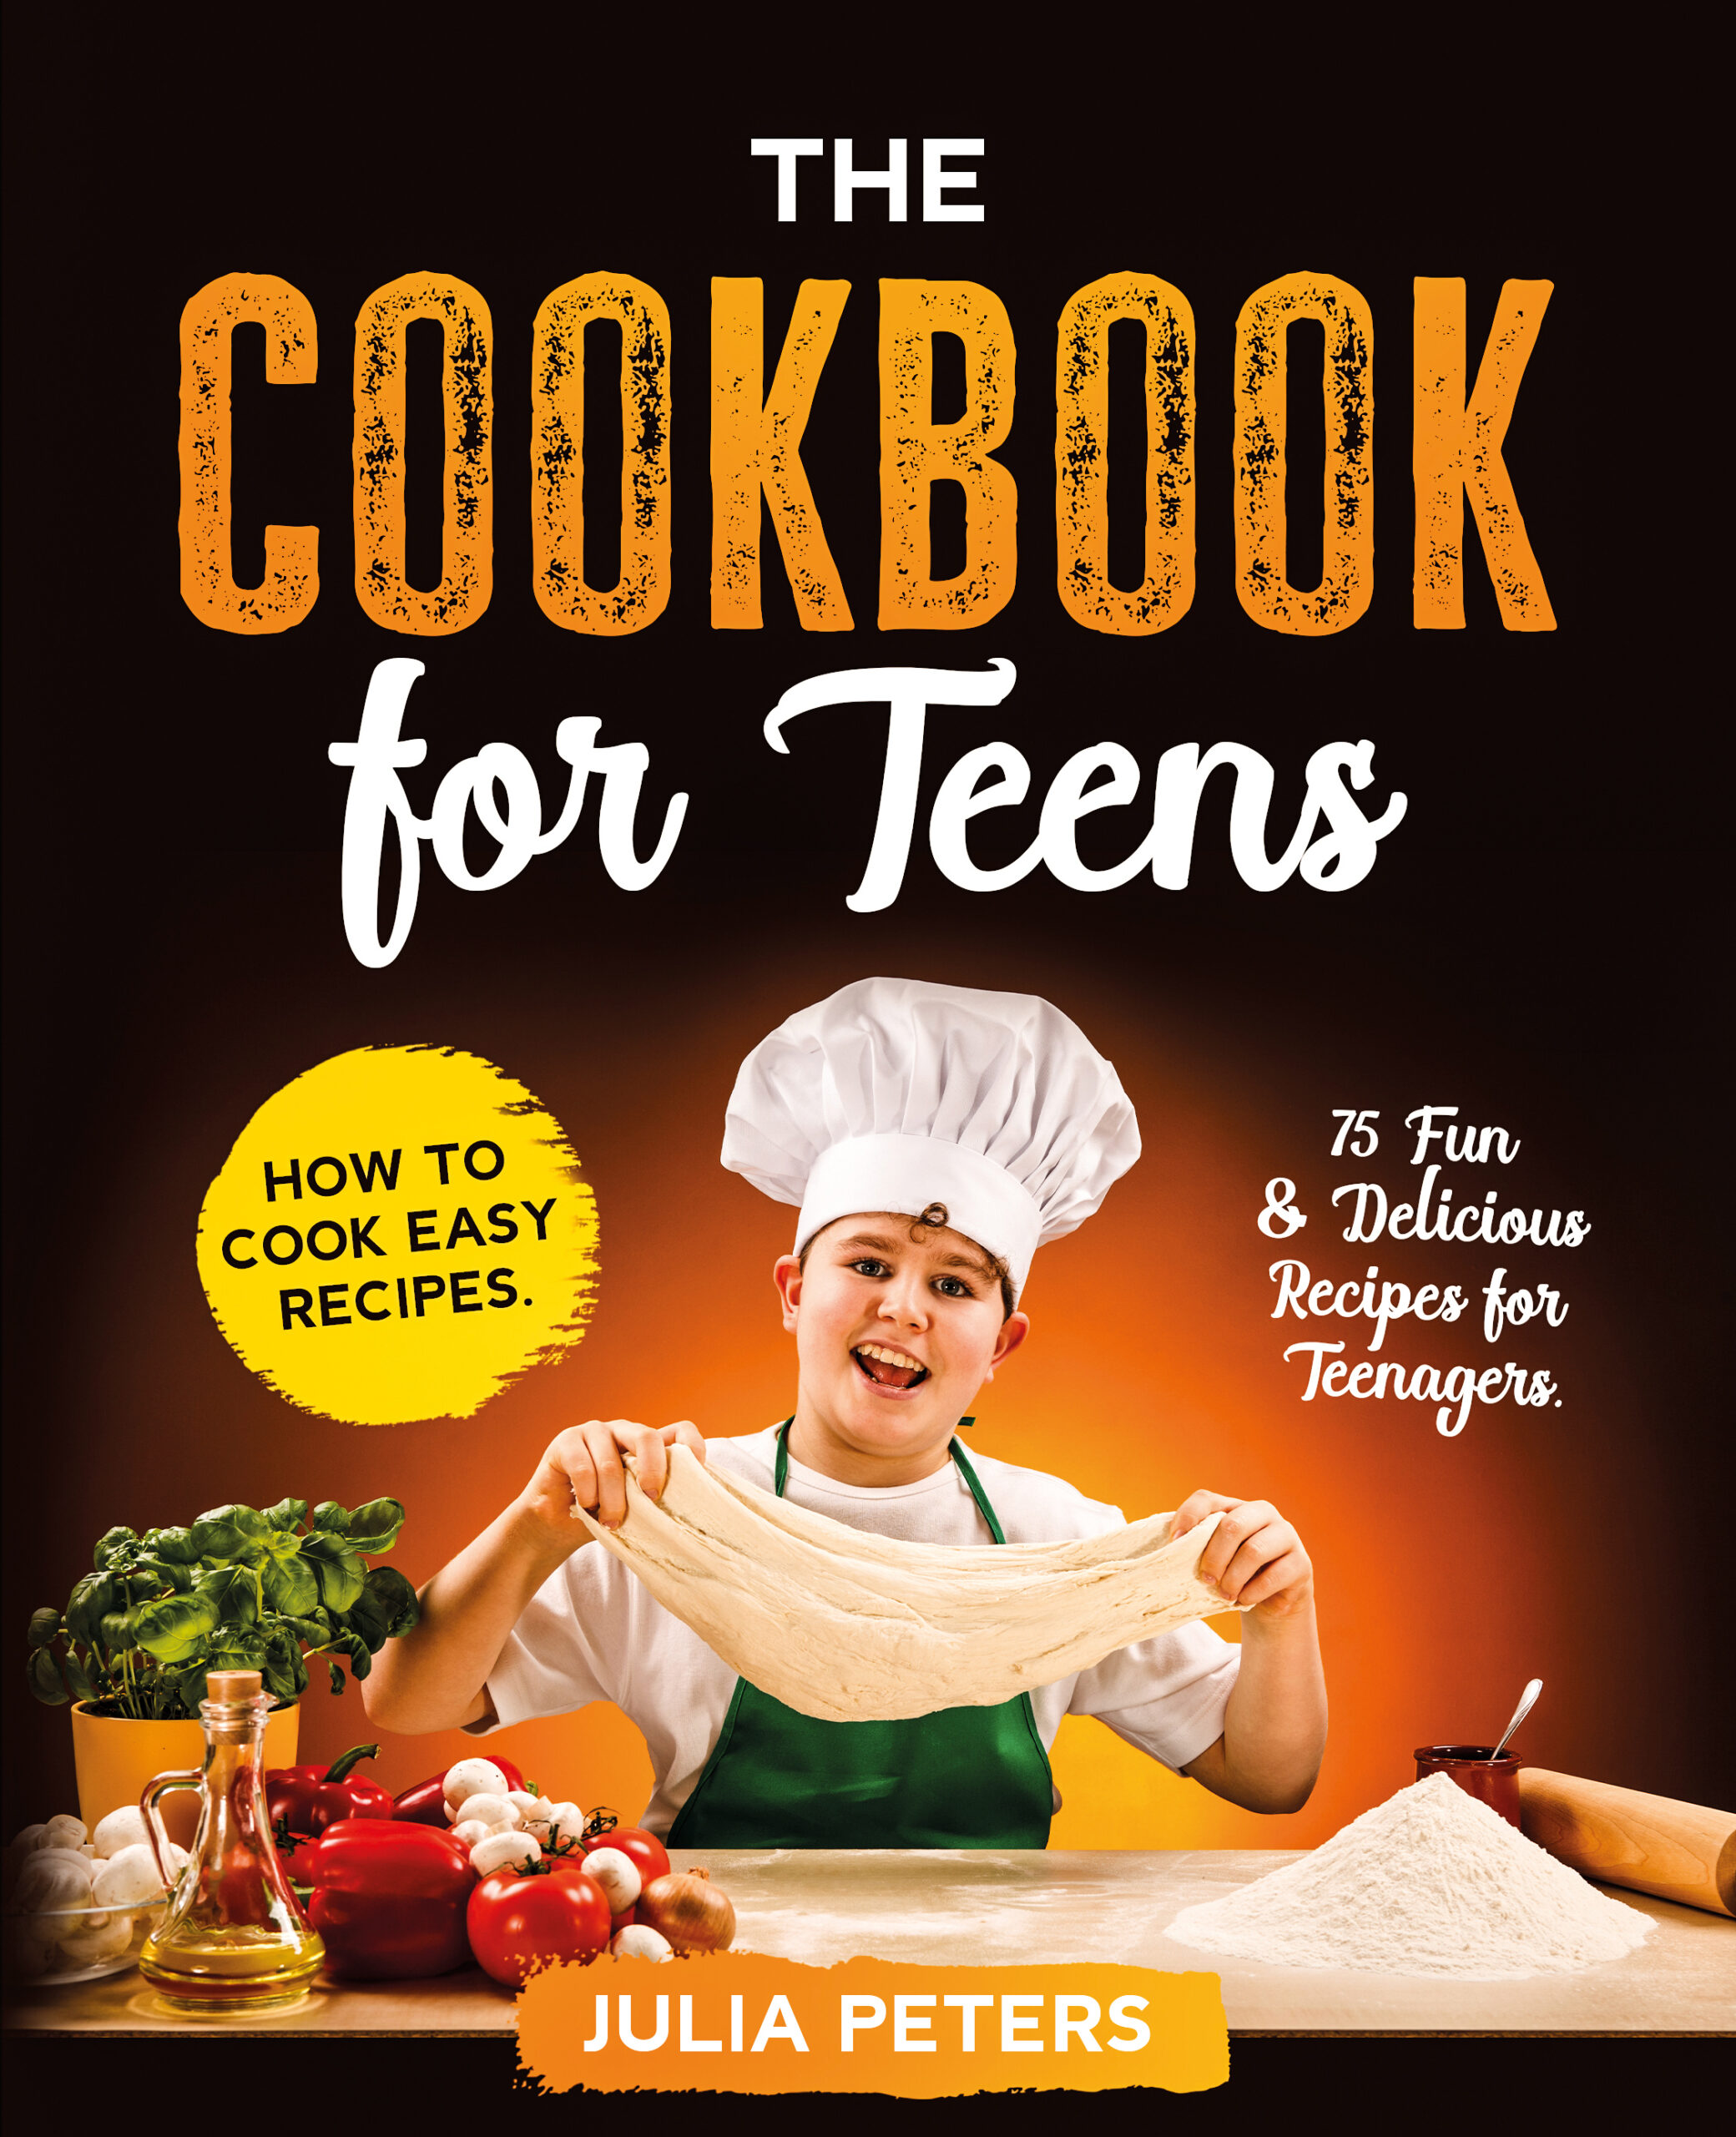 FREE: The Cookbook for Teens: How to Cook Easy Recipes. 75 Fun & Delicious Recipes for Teenagers by Julia Peters